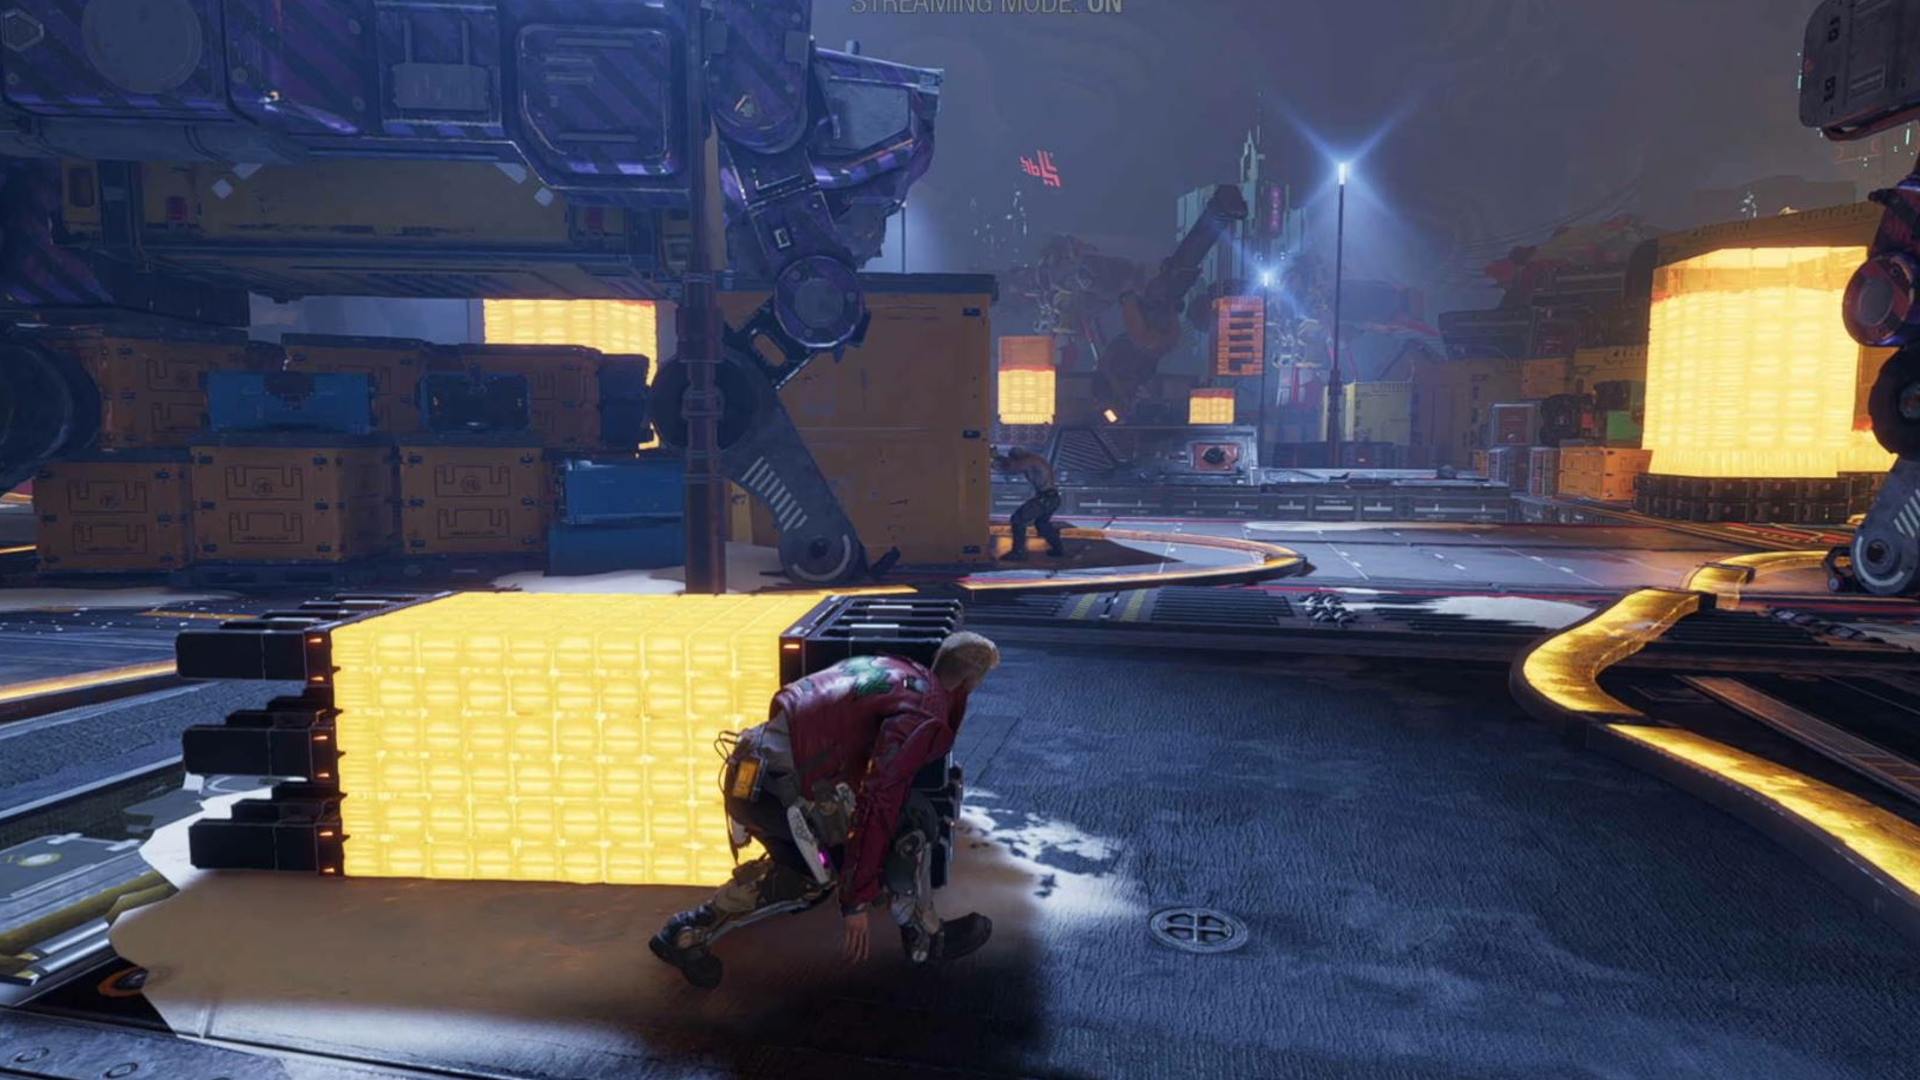 Guardians of the Galaxy outfit locations: Star-Lord is looking at Drax pulling out the yellow box.